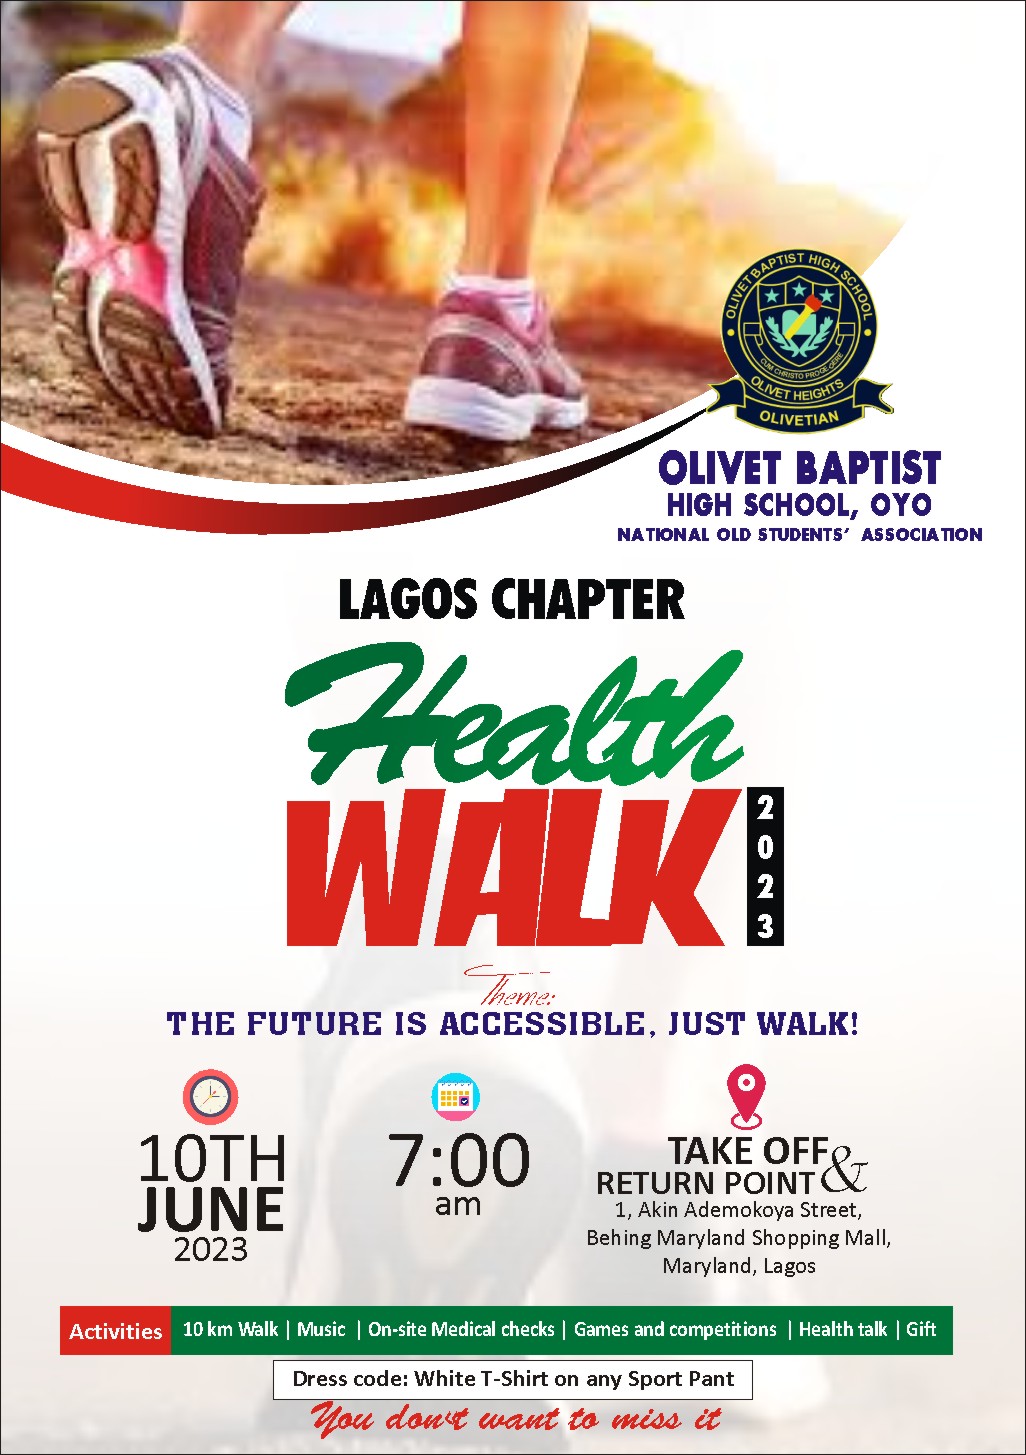 Olivet Baptist High School Alumni Presents Health Walk 2023 The Lagos chapter of the National Old students association of Olivet Baptist High School is set for the 2023 health walk on Saturday, June 10thm 2023 by 7 am. The take-off and return point will be at 1, Akin Ademokoya Street, behind, Maryland shopping mall, Maryland, Lagos. It's going to be fun and full of activities Dress code = White T-shirt on any pant Attractions = 10 km walk = Game = full medical checkup for lucky 3 winners = plenty to eat = on the spot Health screening = aerobics = goodie bag 🎒 for first 100 people = music and more come one, come all